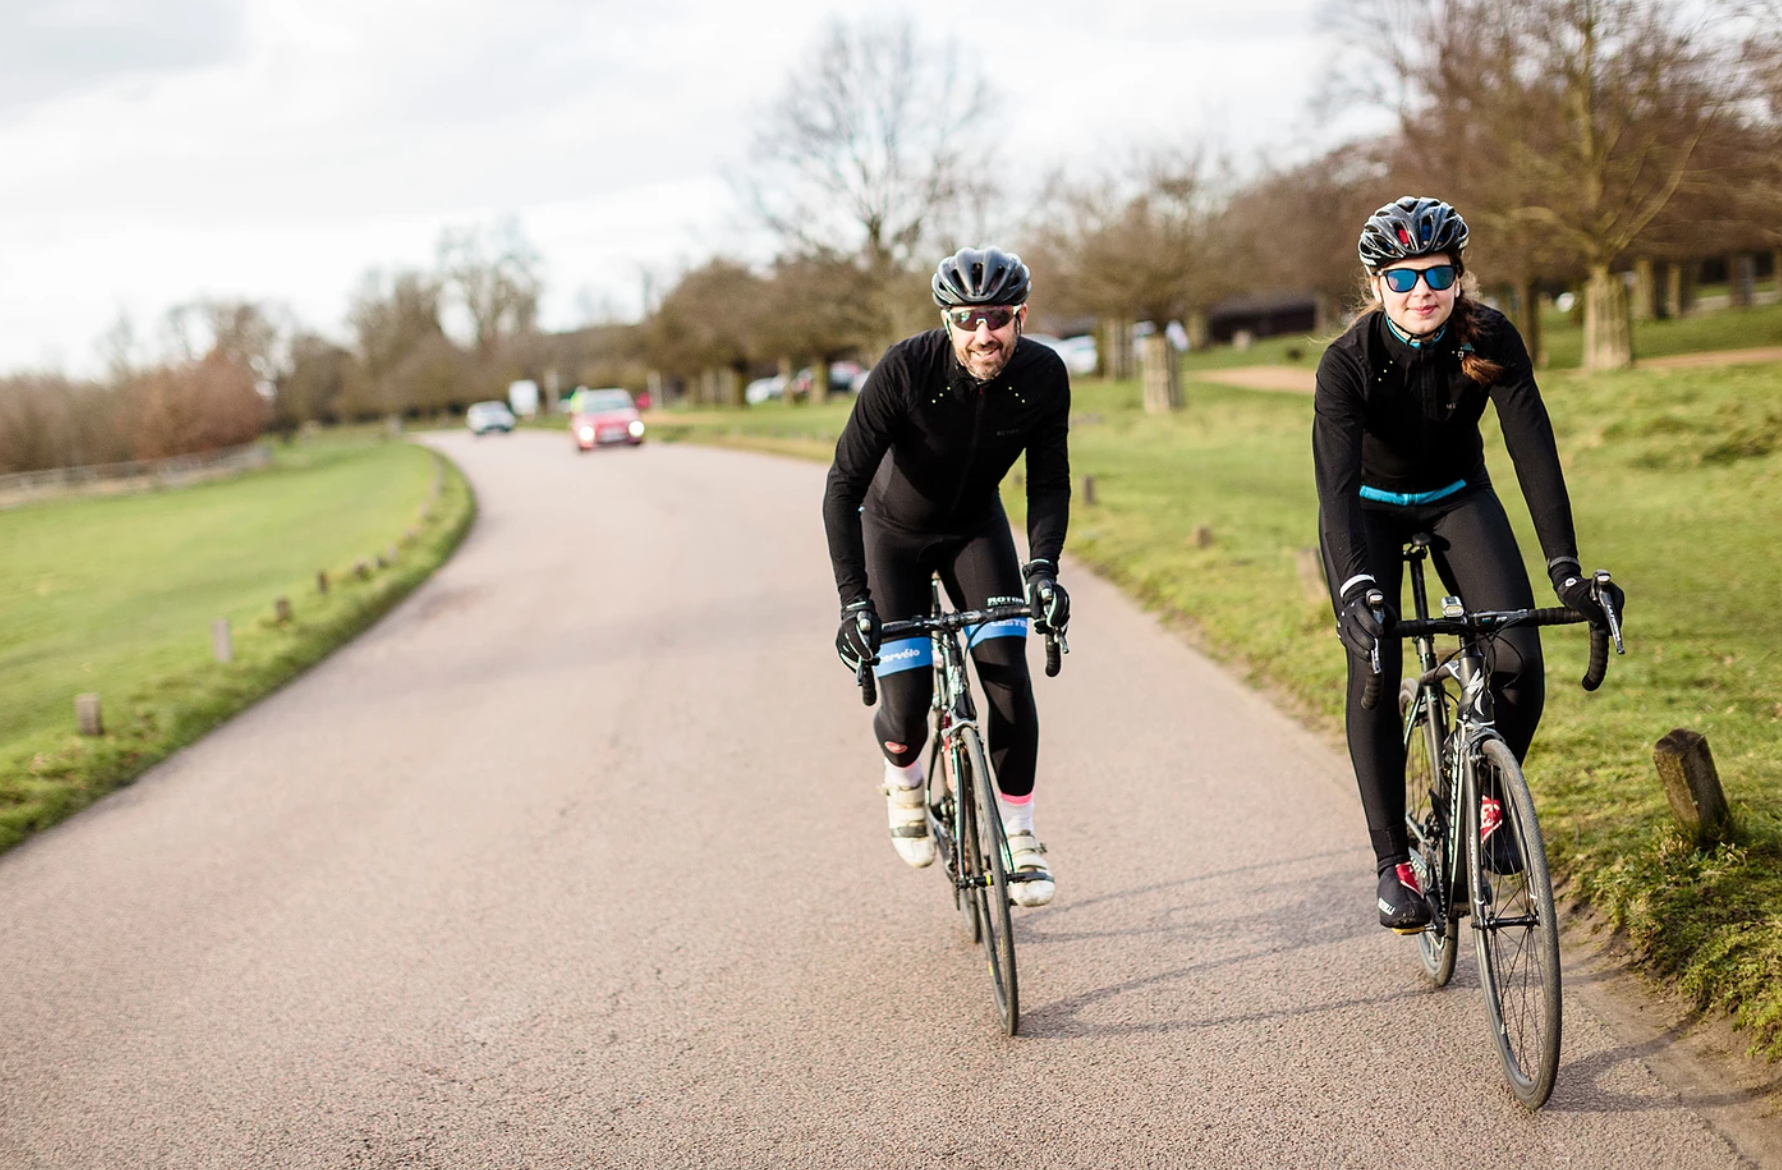 Riding with a British Cycling National Champ